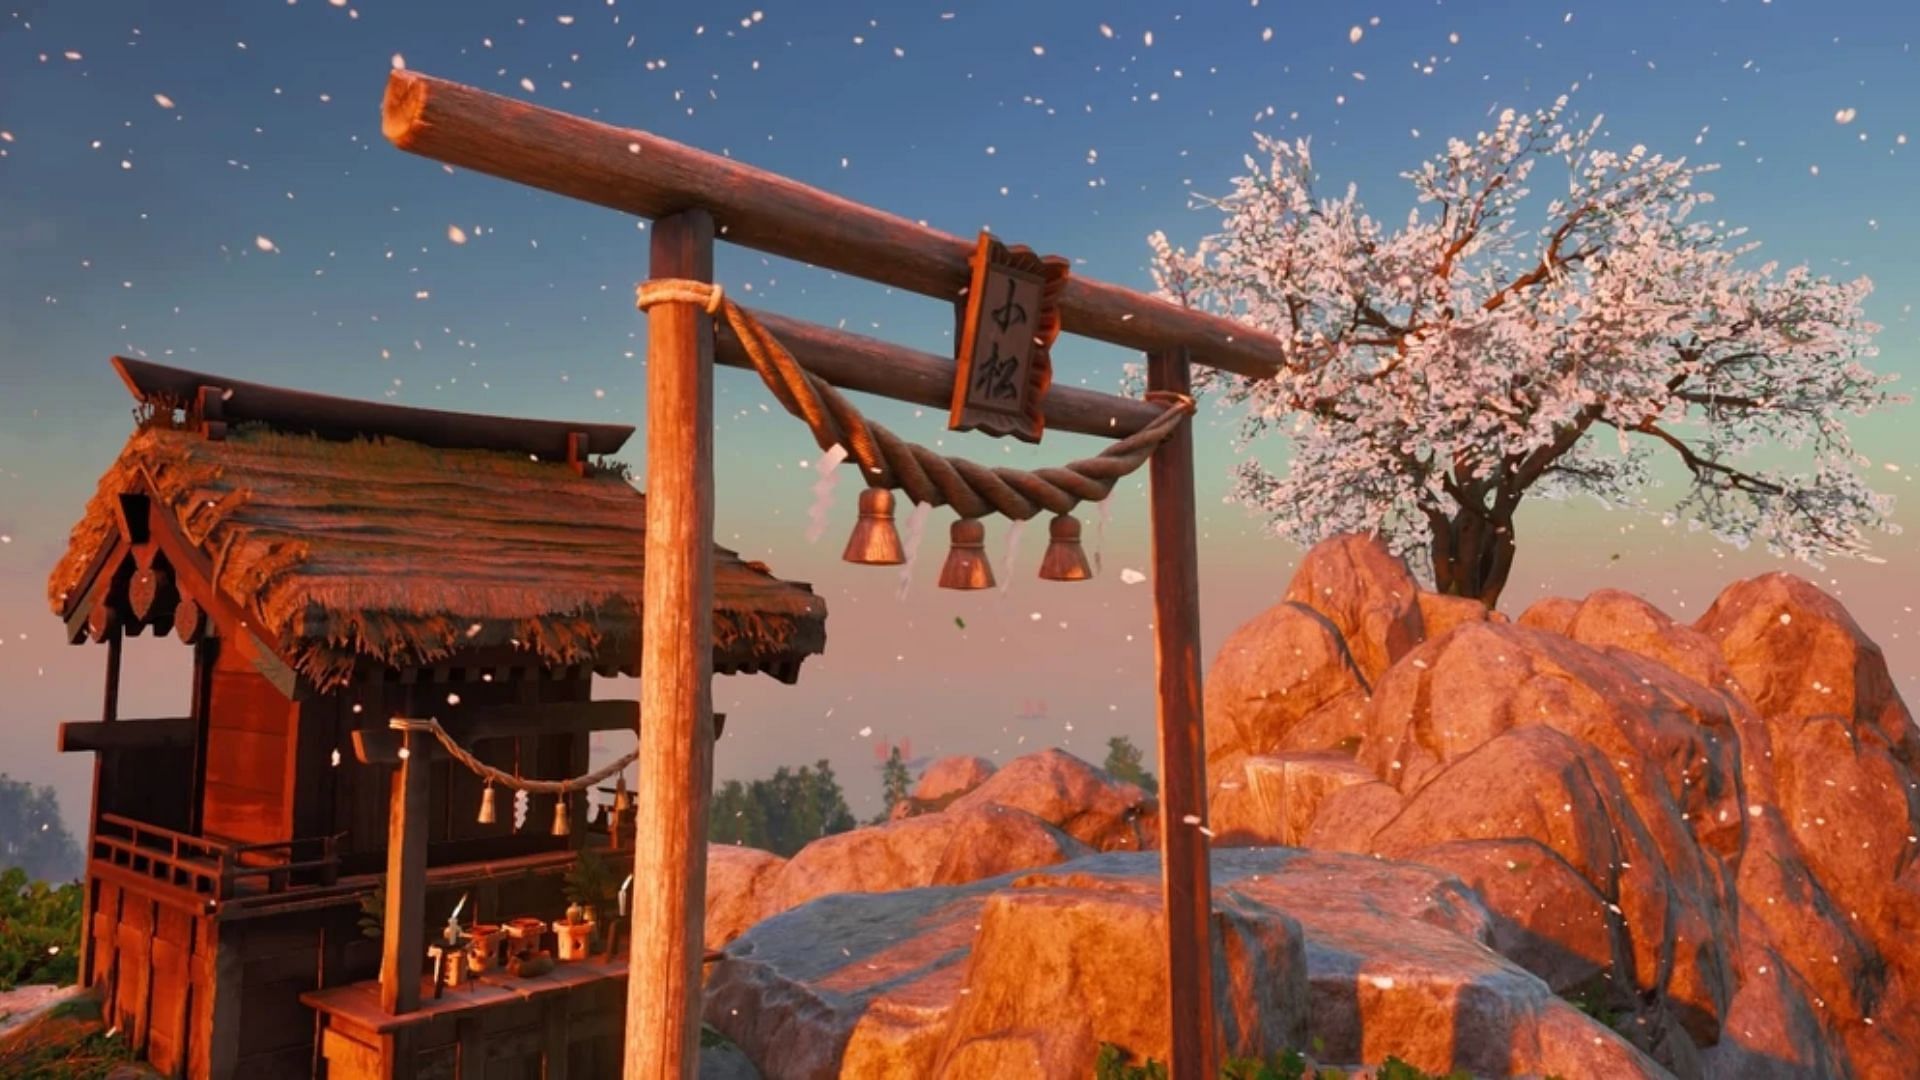 Shinto Shrines in Ghost of Tsushima.